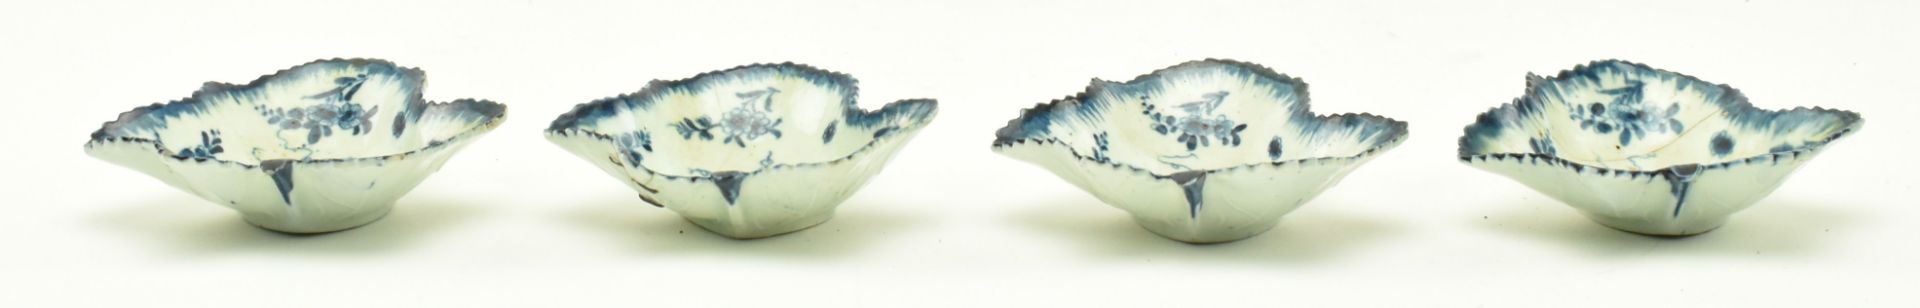 FOUR 18TH CENTURY WORCESTER BLUE & WHITE LEAF PICKLE DISHES - Image 2 of 9